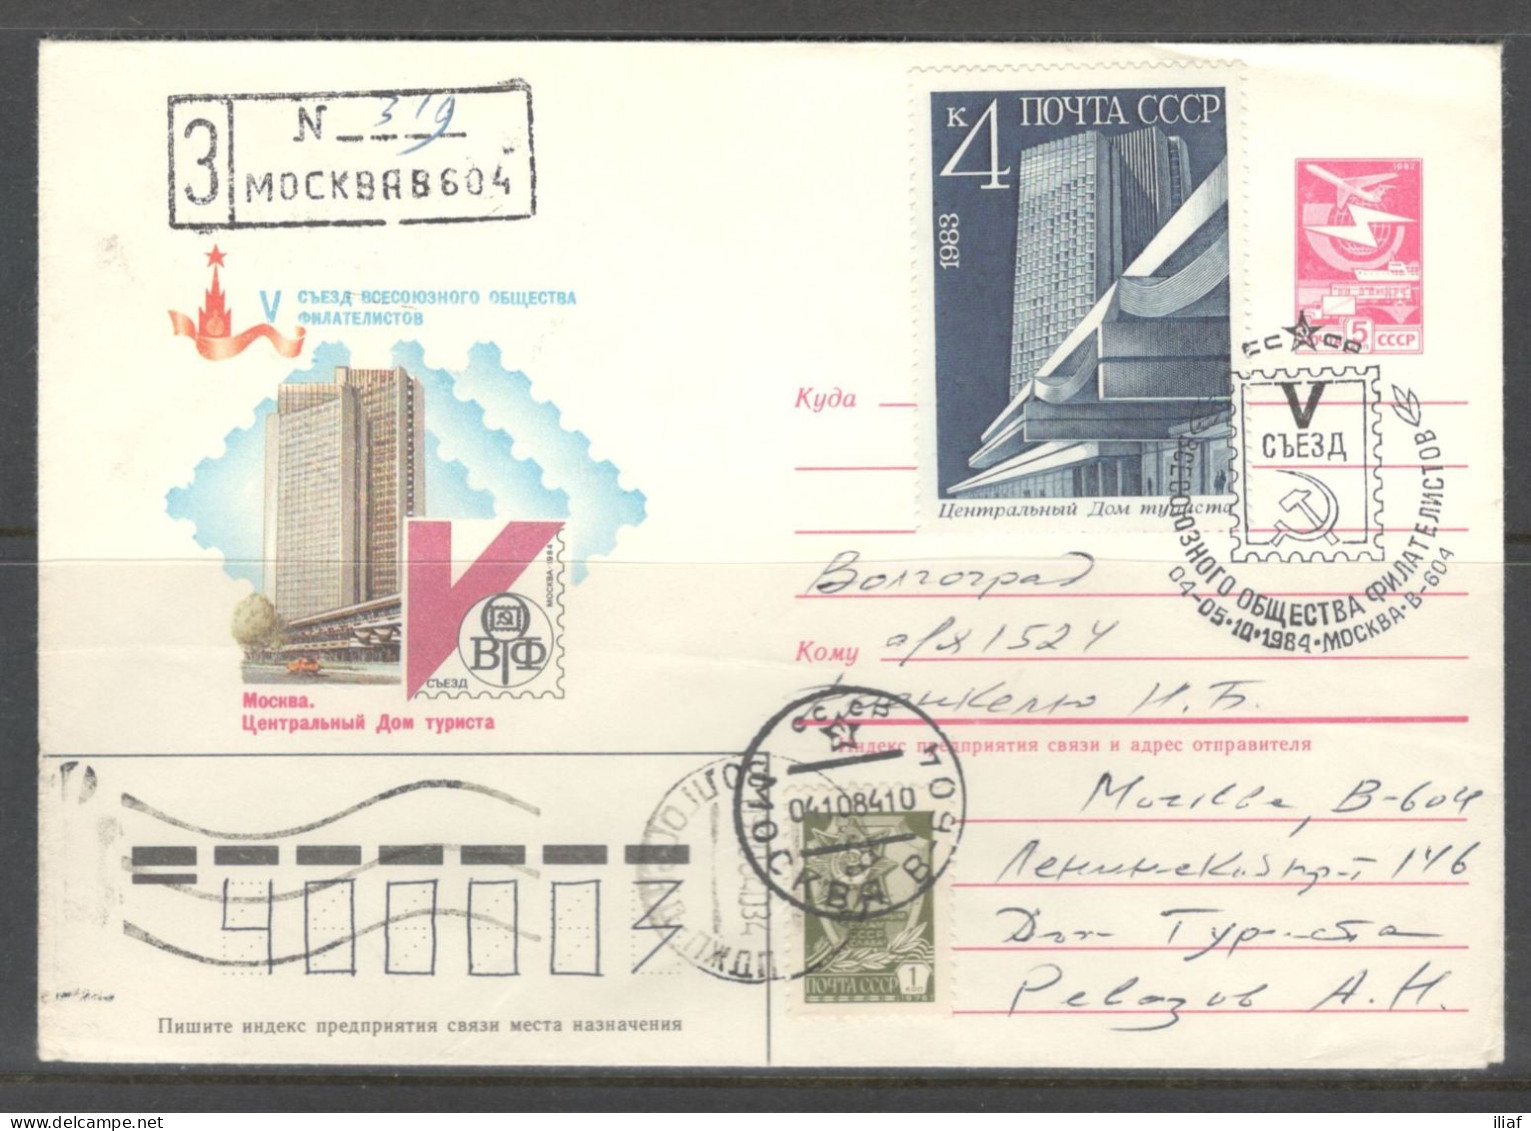 RUSSIA & USSR. 5th Congress Of The All-Union Society Of Philatelists. Illustrated Envelope With Special Cancellation - Dag Van De Postzegel